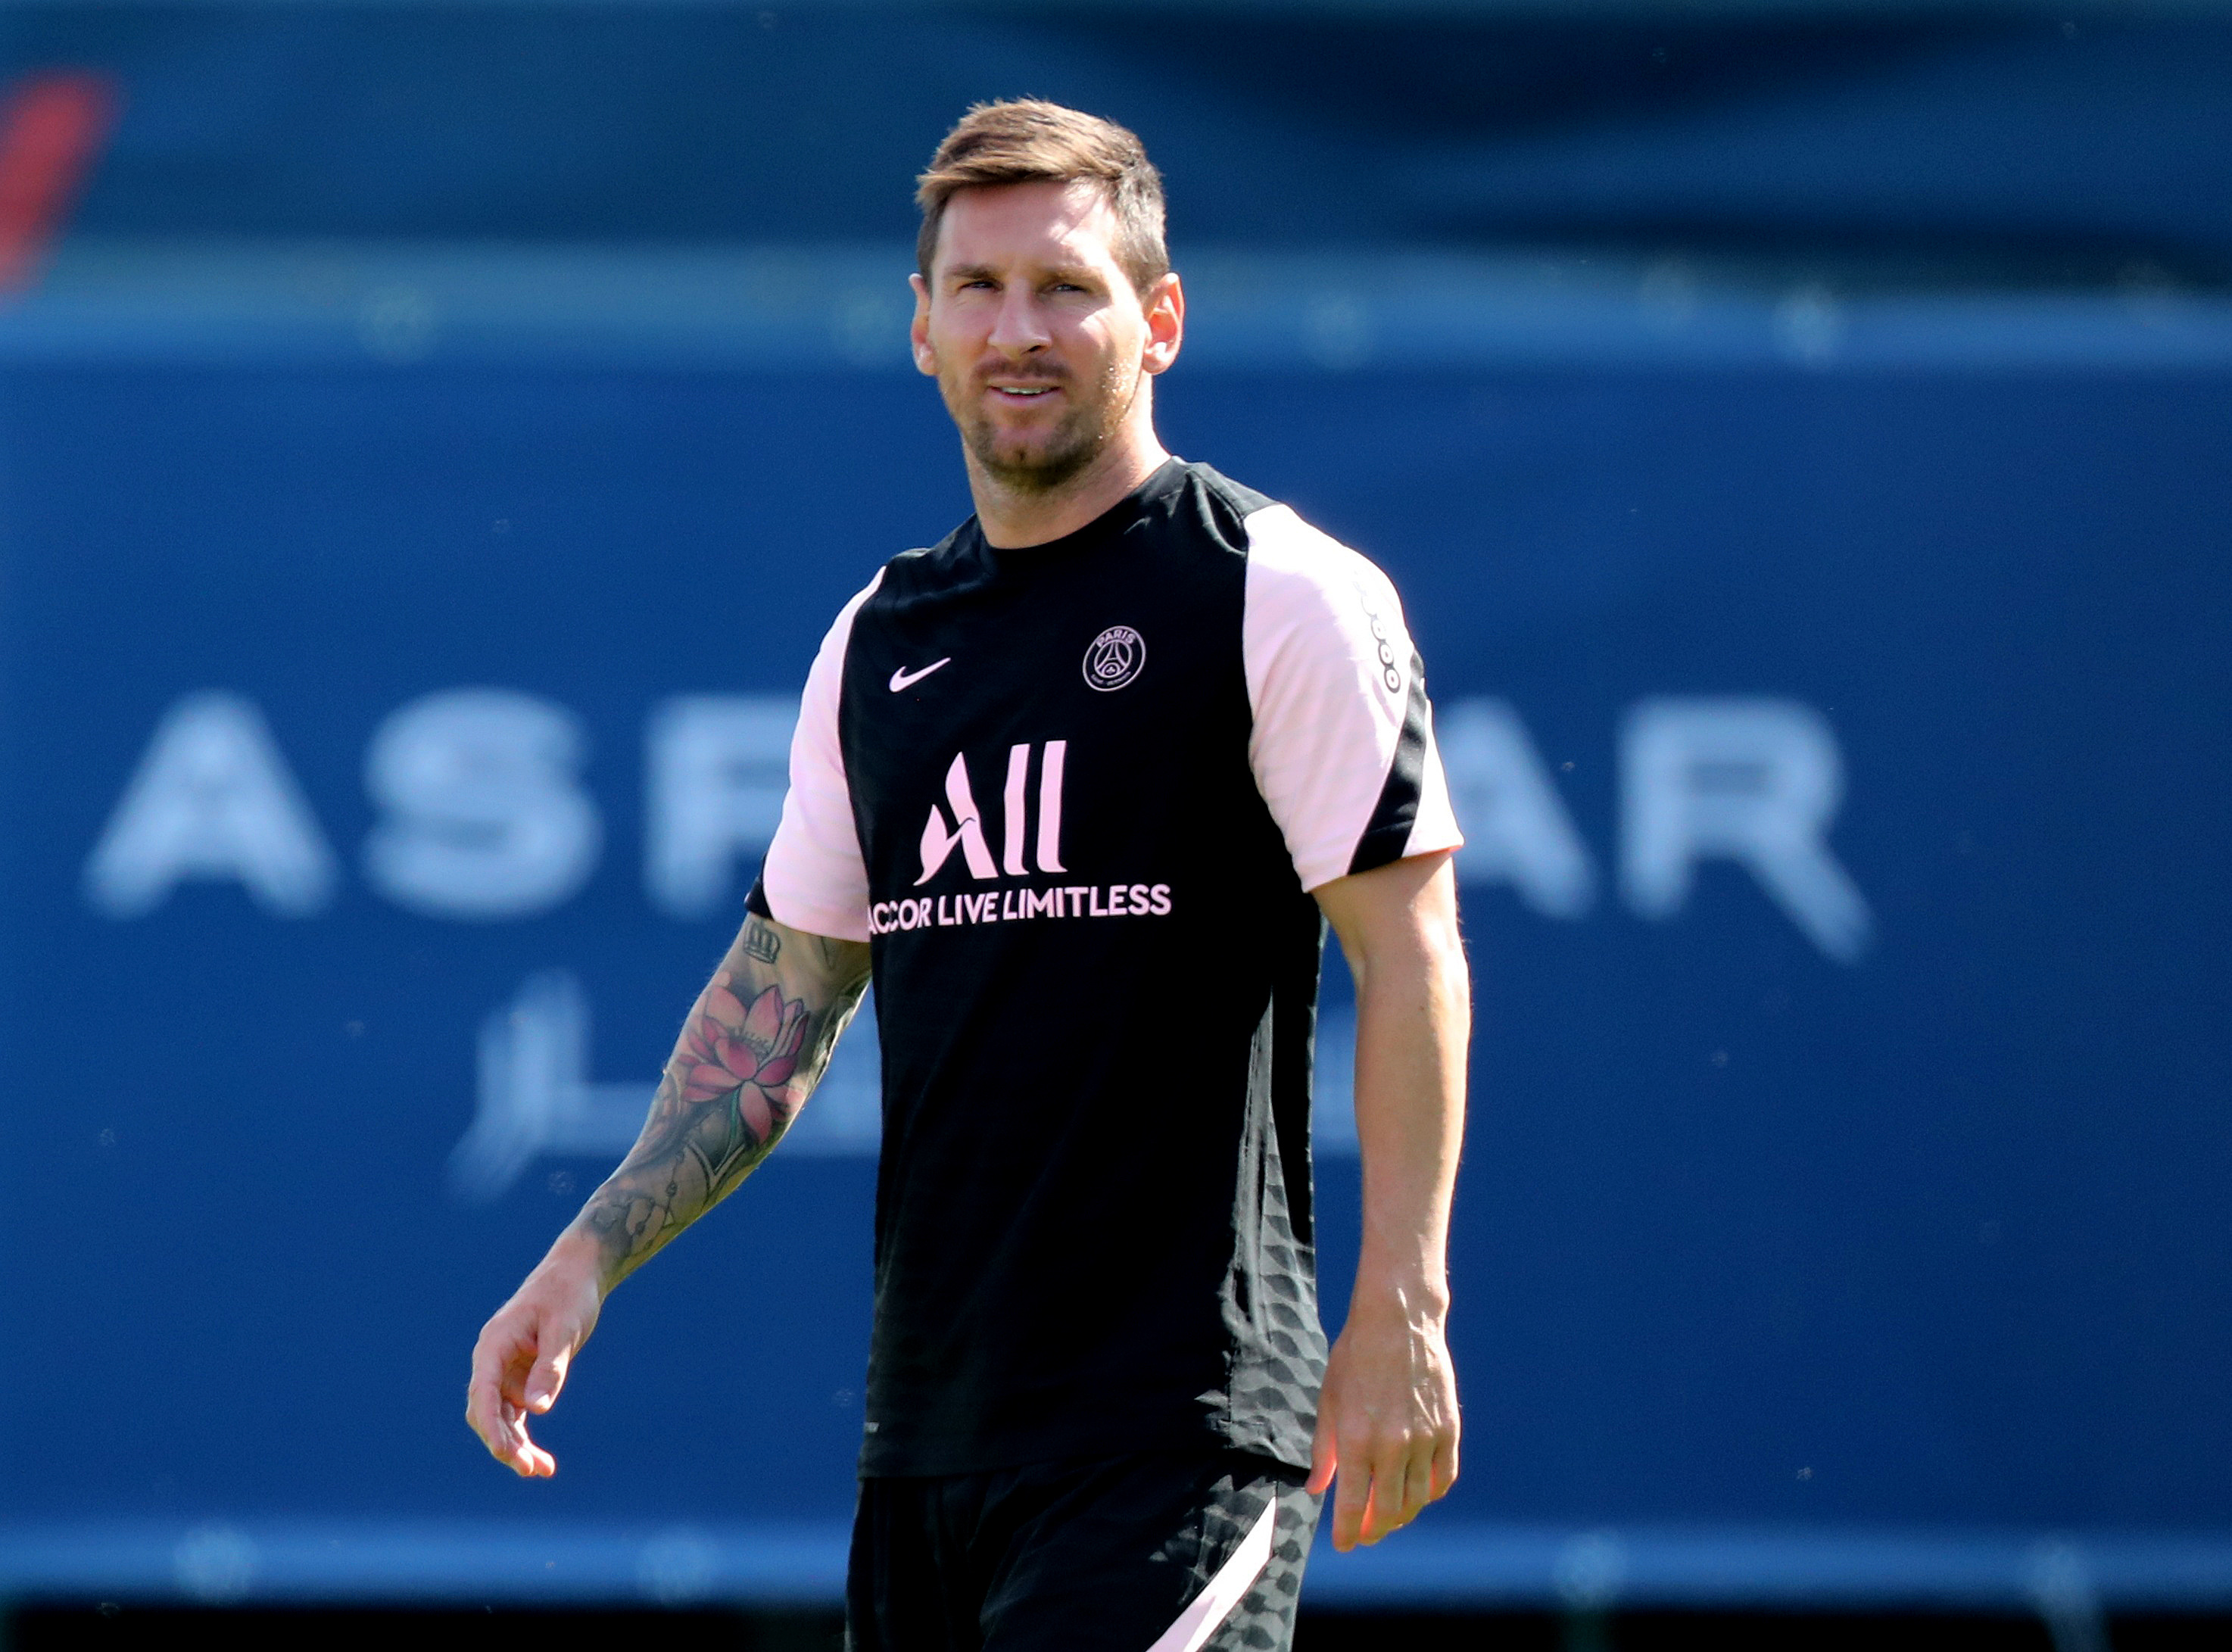 PSG's Messi doubtful for Champions League clash with Bayern - L